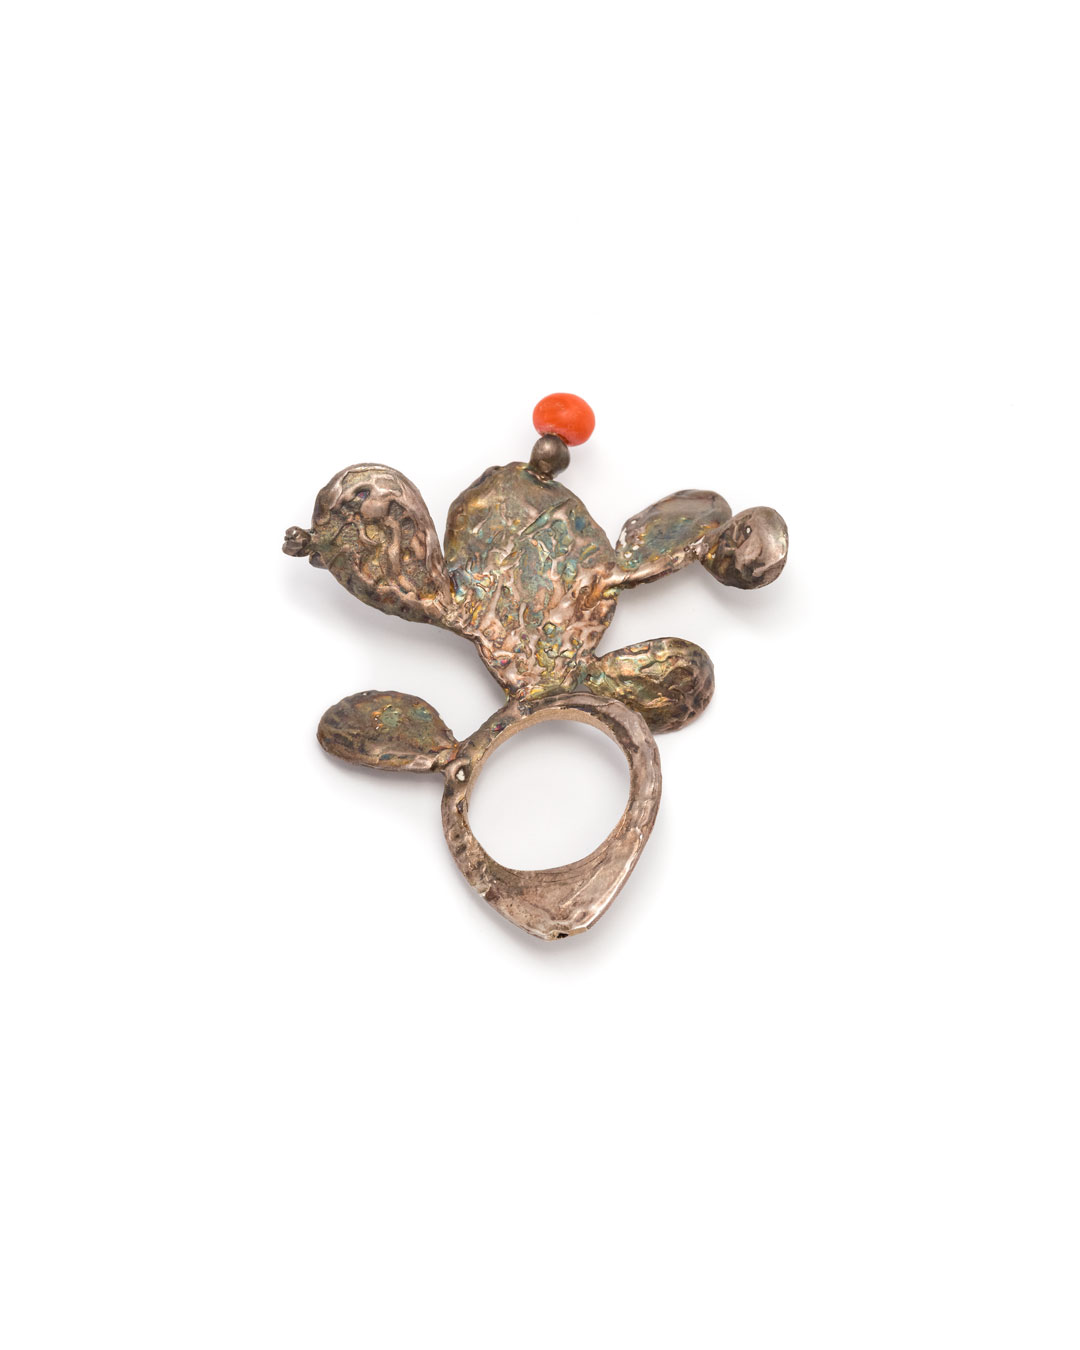 Winfried Krüger, untitled, 2002, ring; silver, coral, 60 x 51 x 16 mm, €535